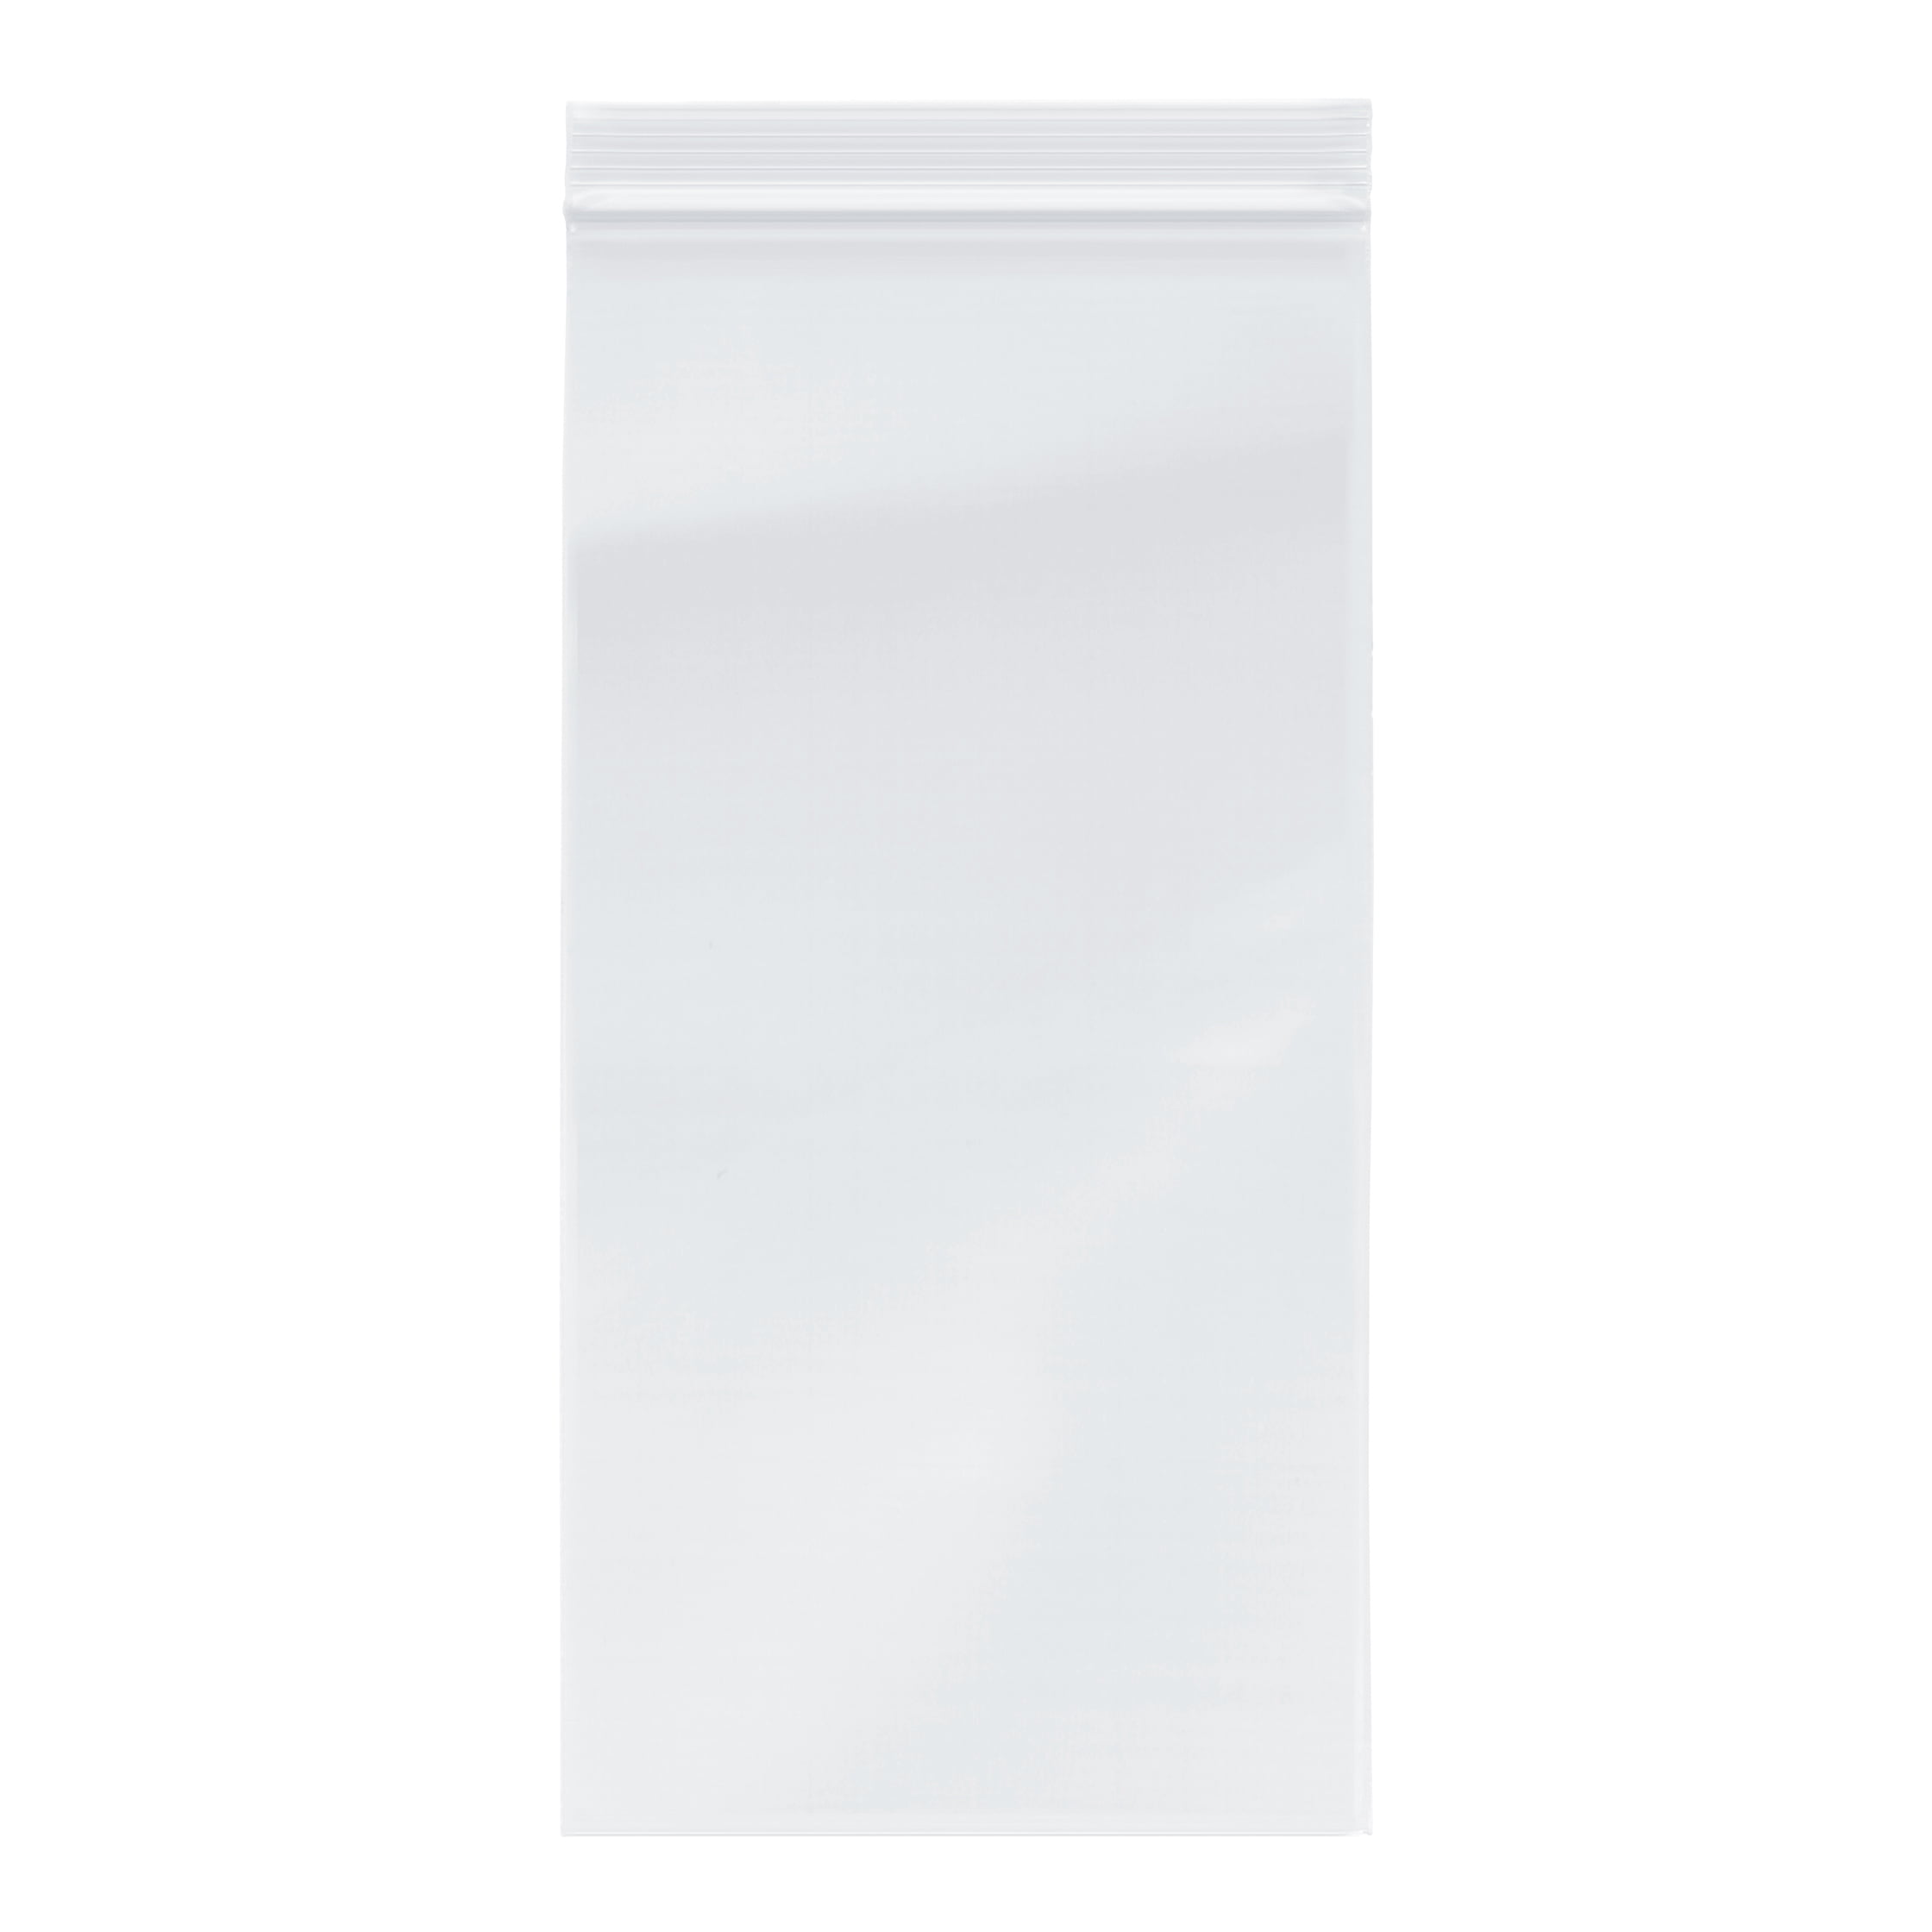  ENPOINT Clear Zip Plastic Poly Bags, 50 Pcs 12x16 Inch Clear  Poly Slider Shipping Bags, Reclosable Ziplock Clothing Packaging Bags with  Resealable Lock Seal Zipper and Vent Holes, 3 Mil 